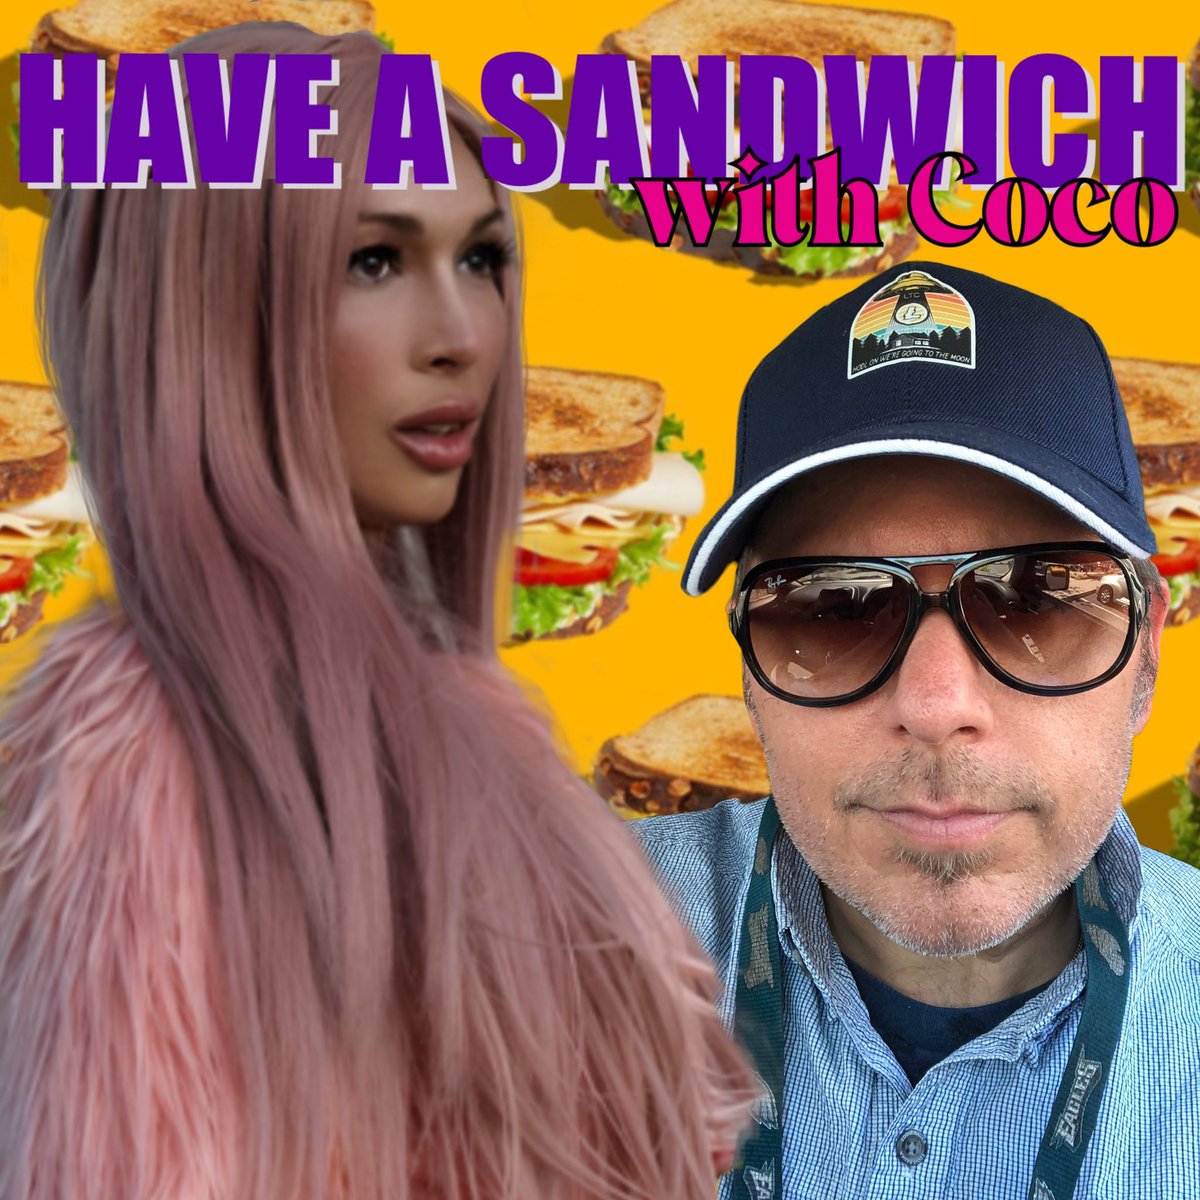 Monday on #BitcoinliveDB #SandwichWithCoco  EP04: 'Gerald - The Crypto Oracle' ☆Presented by @Deathtococo @ger313 ☆Time 22:00/10PM (CET) ☆Streaming @BitcoinliveDB ☆YouTube m.youtube.com/@BitcoinliveDB… 🚀Sponsored by @RoundlyX